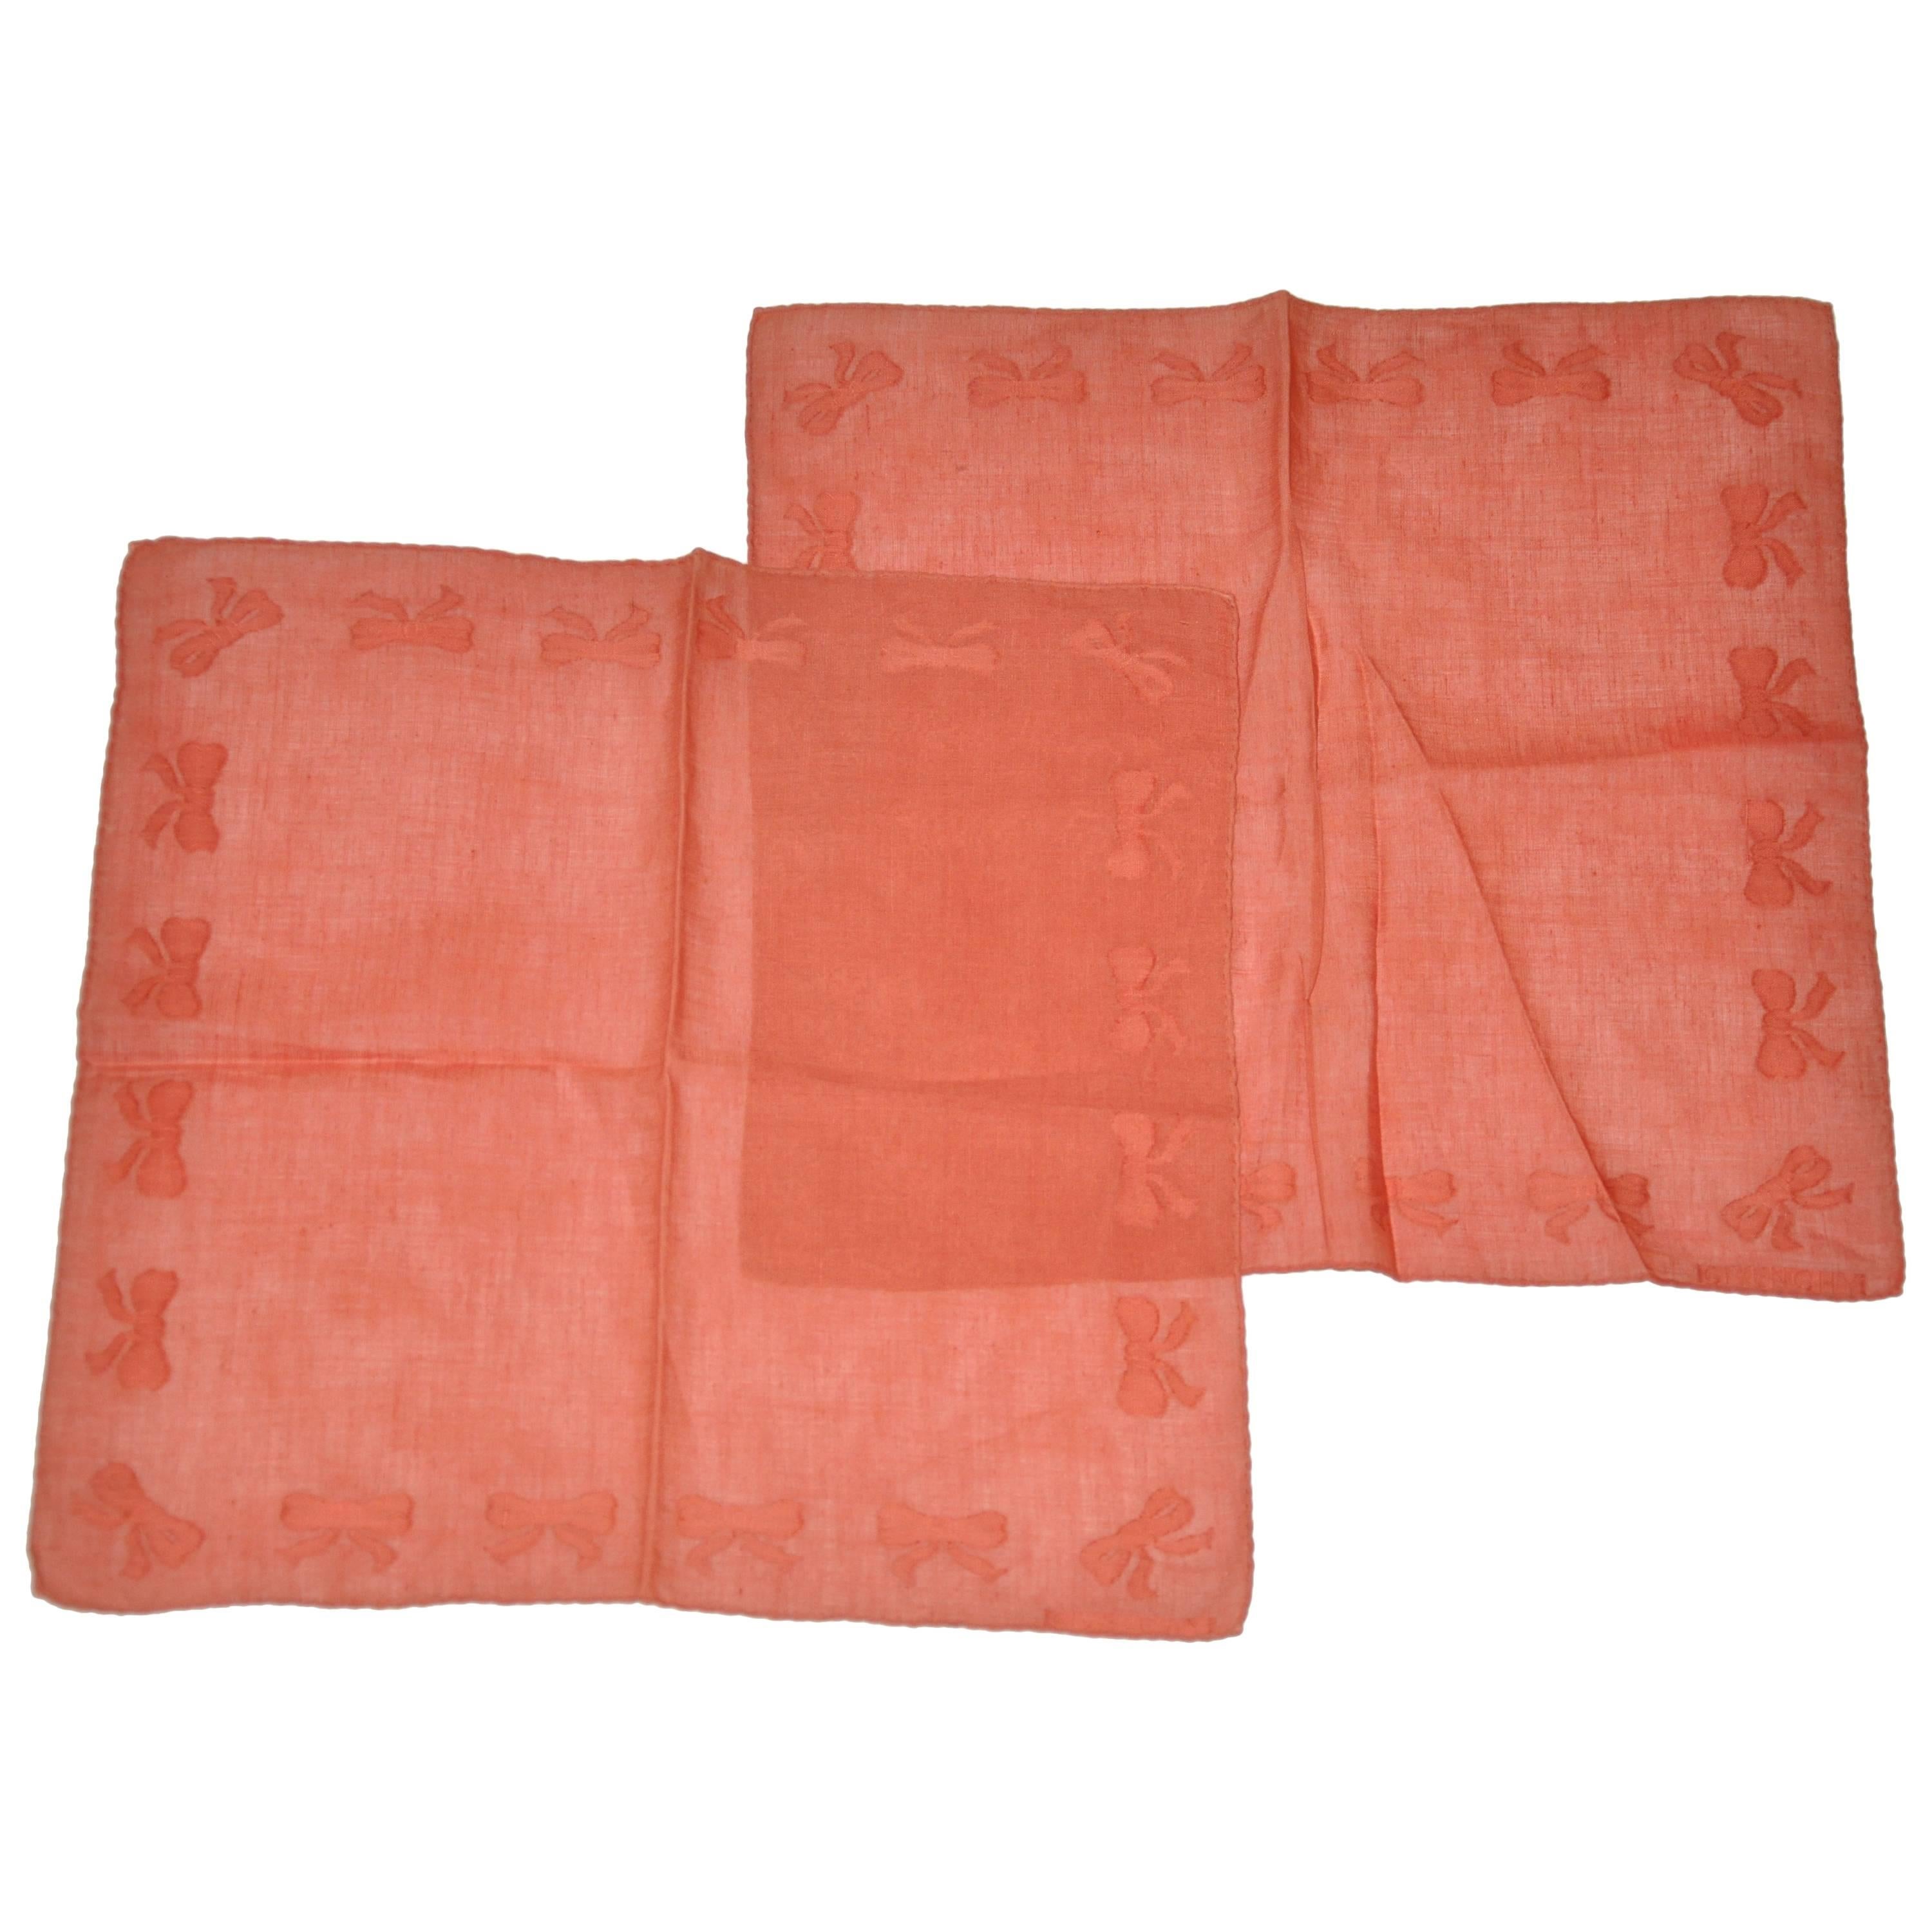 Givenchy set of Coral Linen "Bows" Men's Handkerchief For Sale